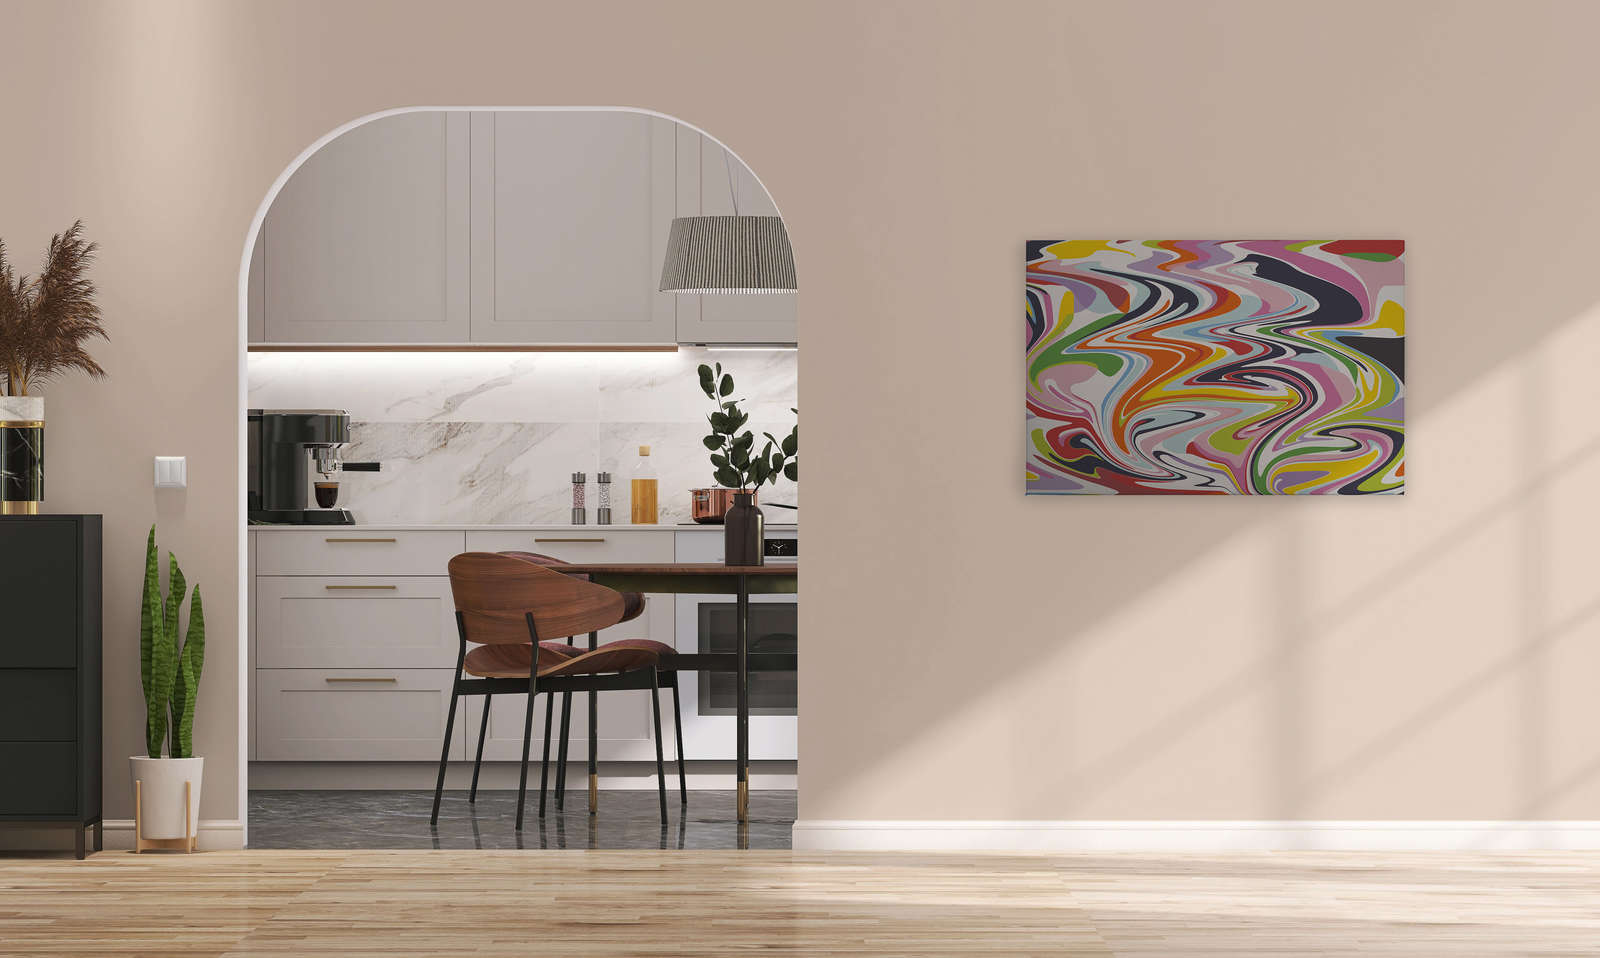             Canvas painting abstract colour mix colourful pattern - 0,90 m x 0,60 m
        